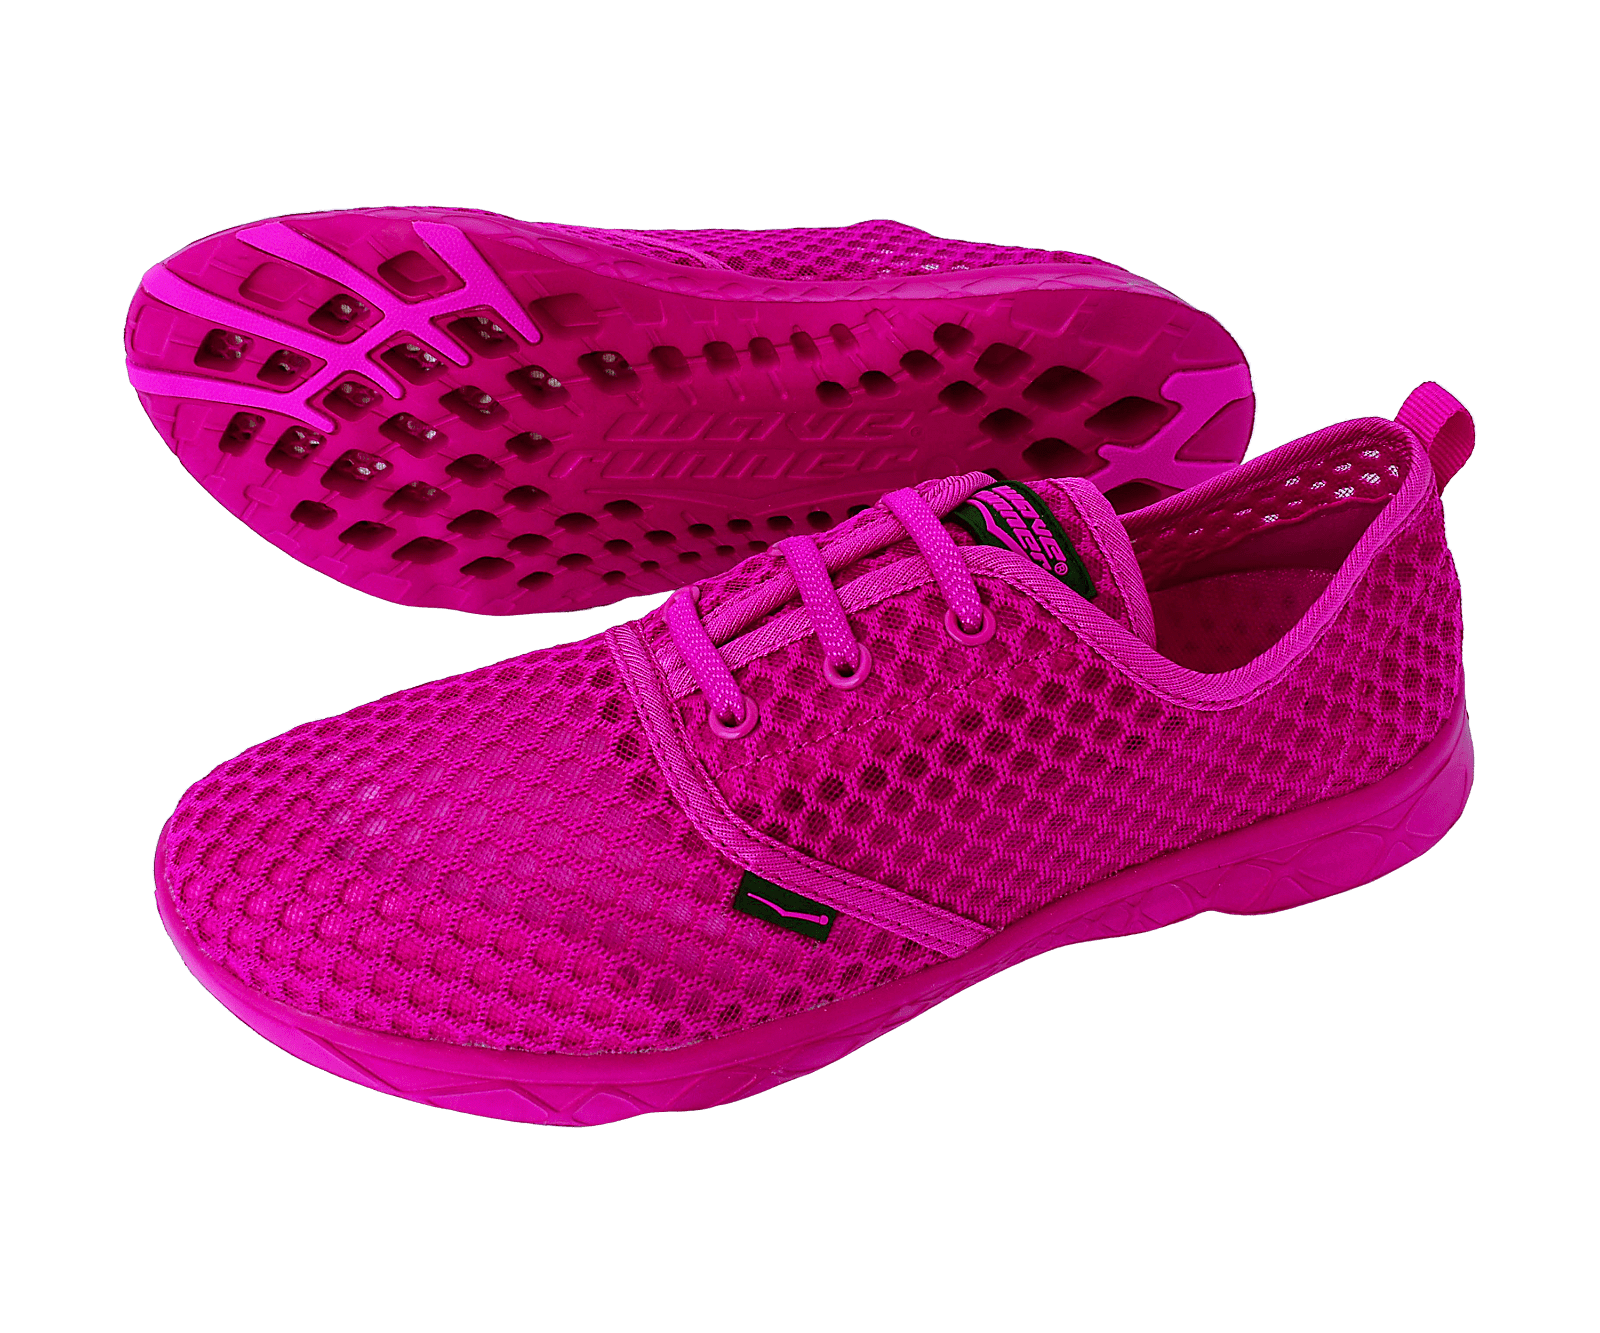 Details about   Women Woven Light Weight Elastic Trainer Comfort Slip On Sport Water Shoes